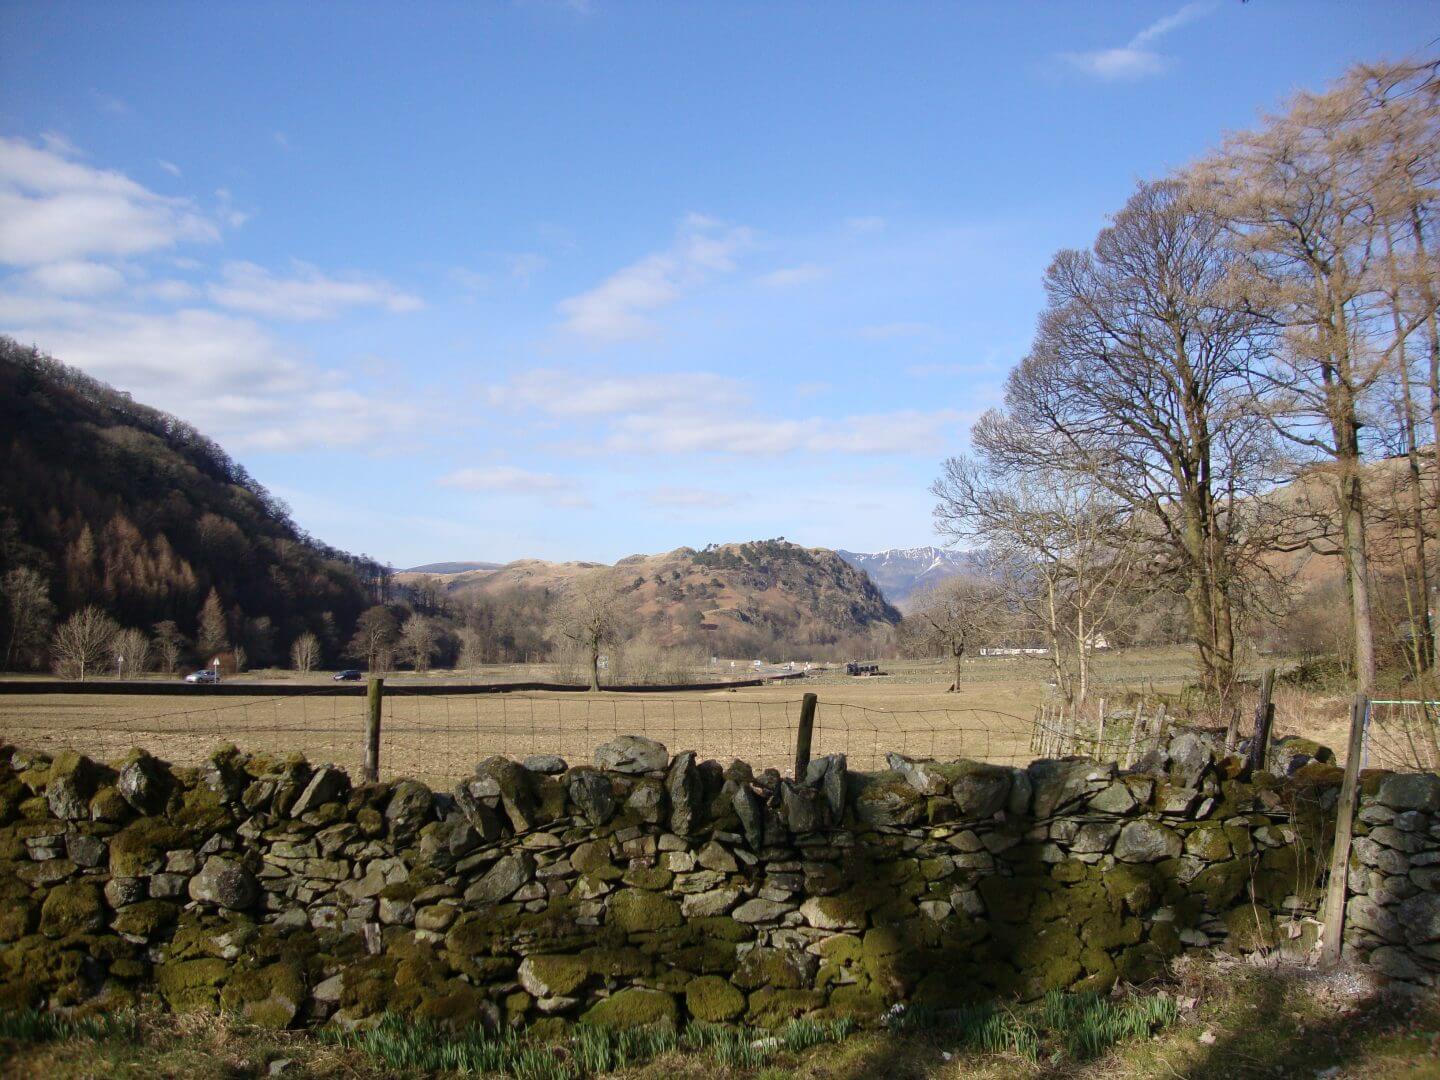 Fisher-gill Camping Barn - independent hostel - self catering cottages - helvellyn range